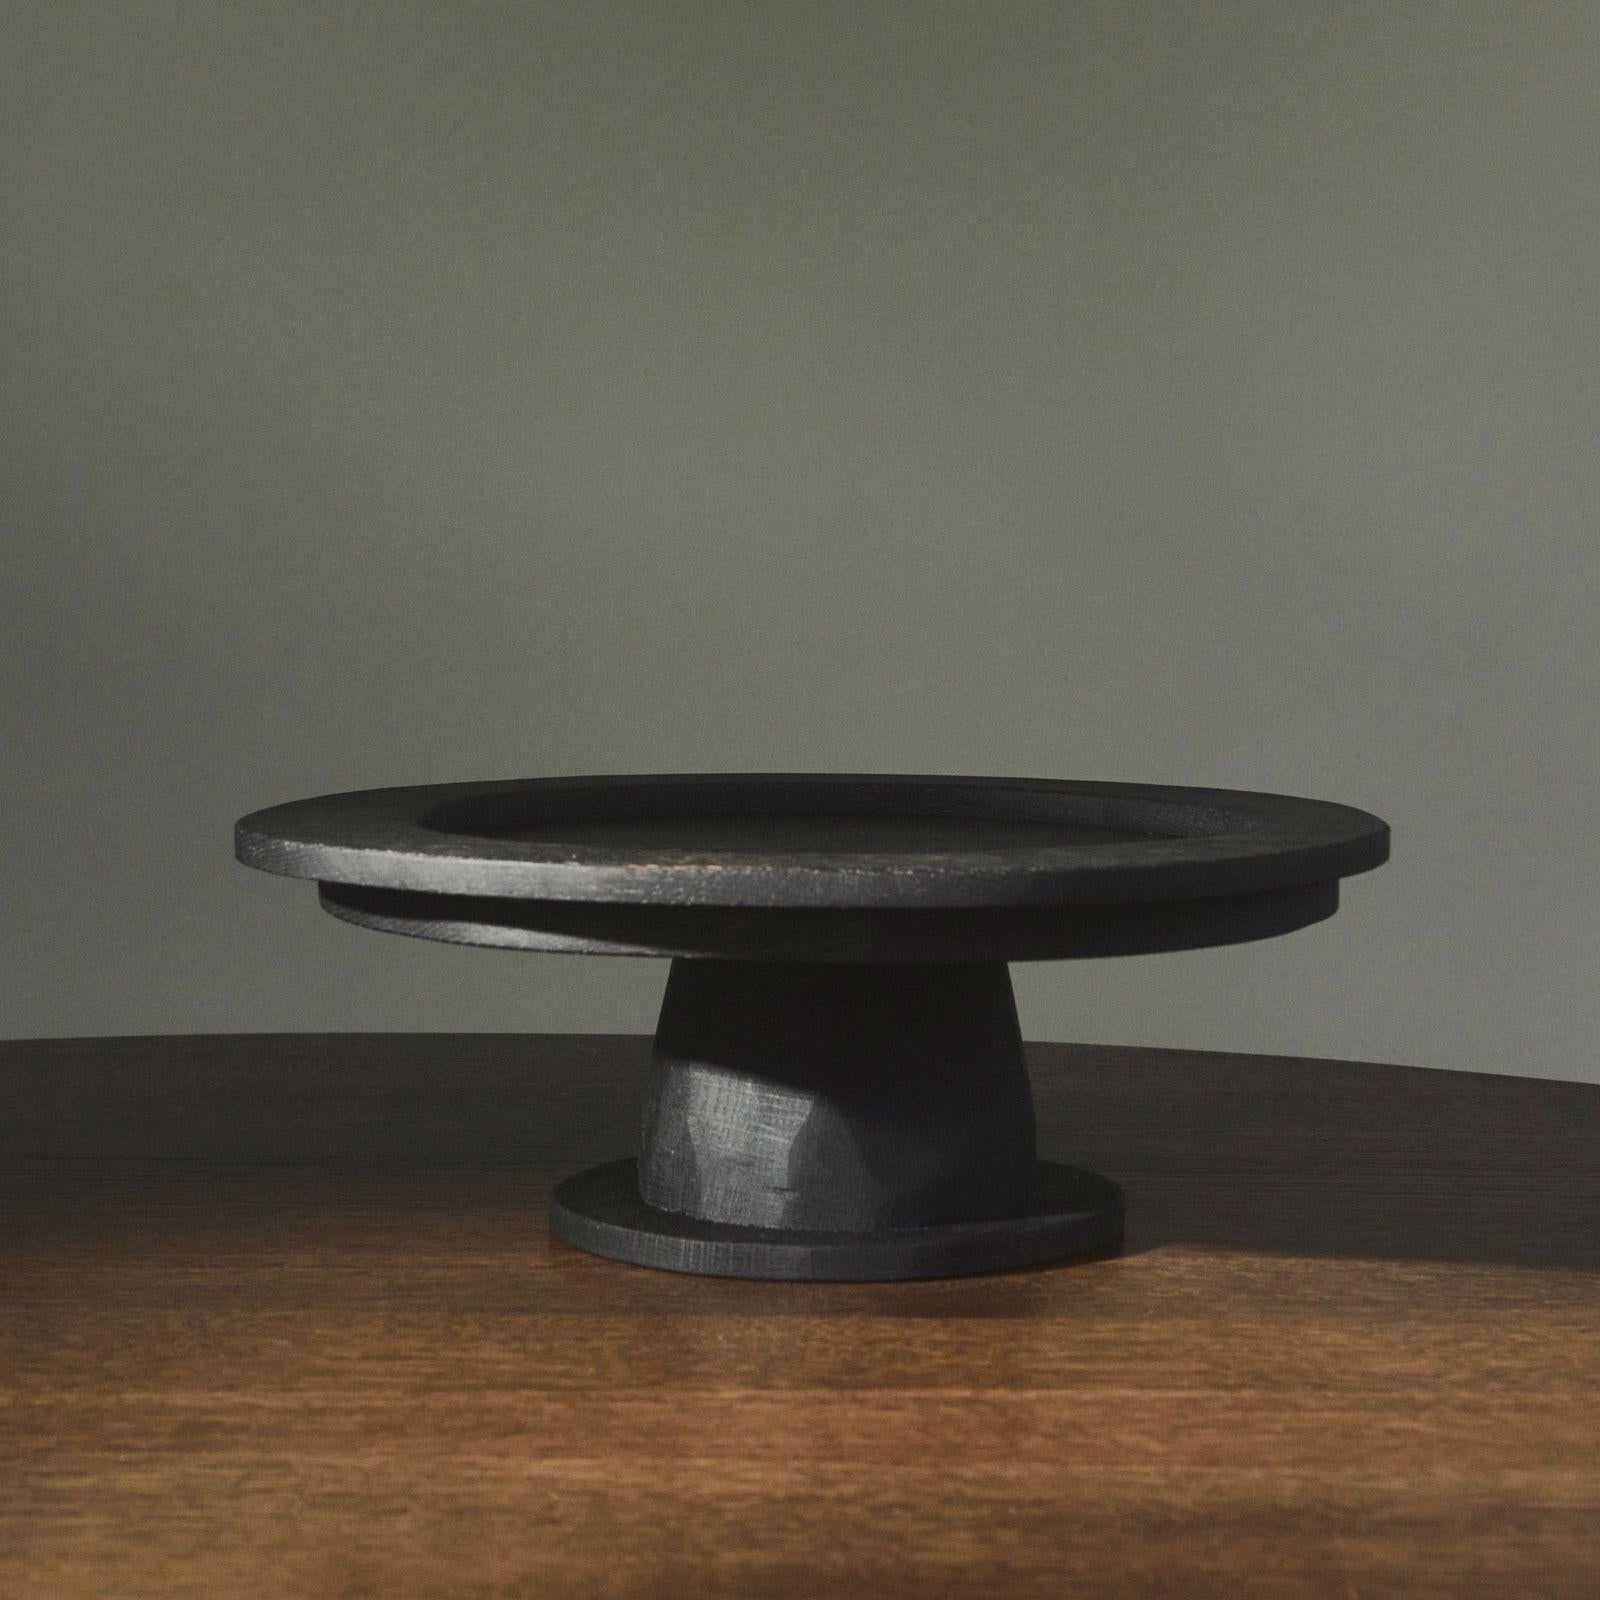 C + J Oak Pedestal Plate by Fora Projects 
Designed by Christian + Jade

Material: Oak wood
Color: Black brown
Brown surface treatment with non-toxic hardwax oil

Dimensions: (Large) 
H. 13 - D. 35 cm 

_______________

The C + J pedestal plate was